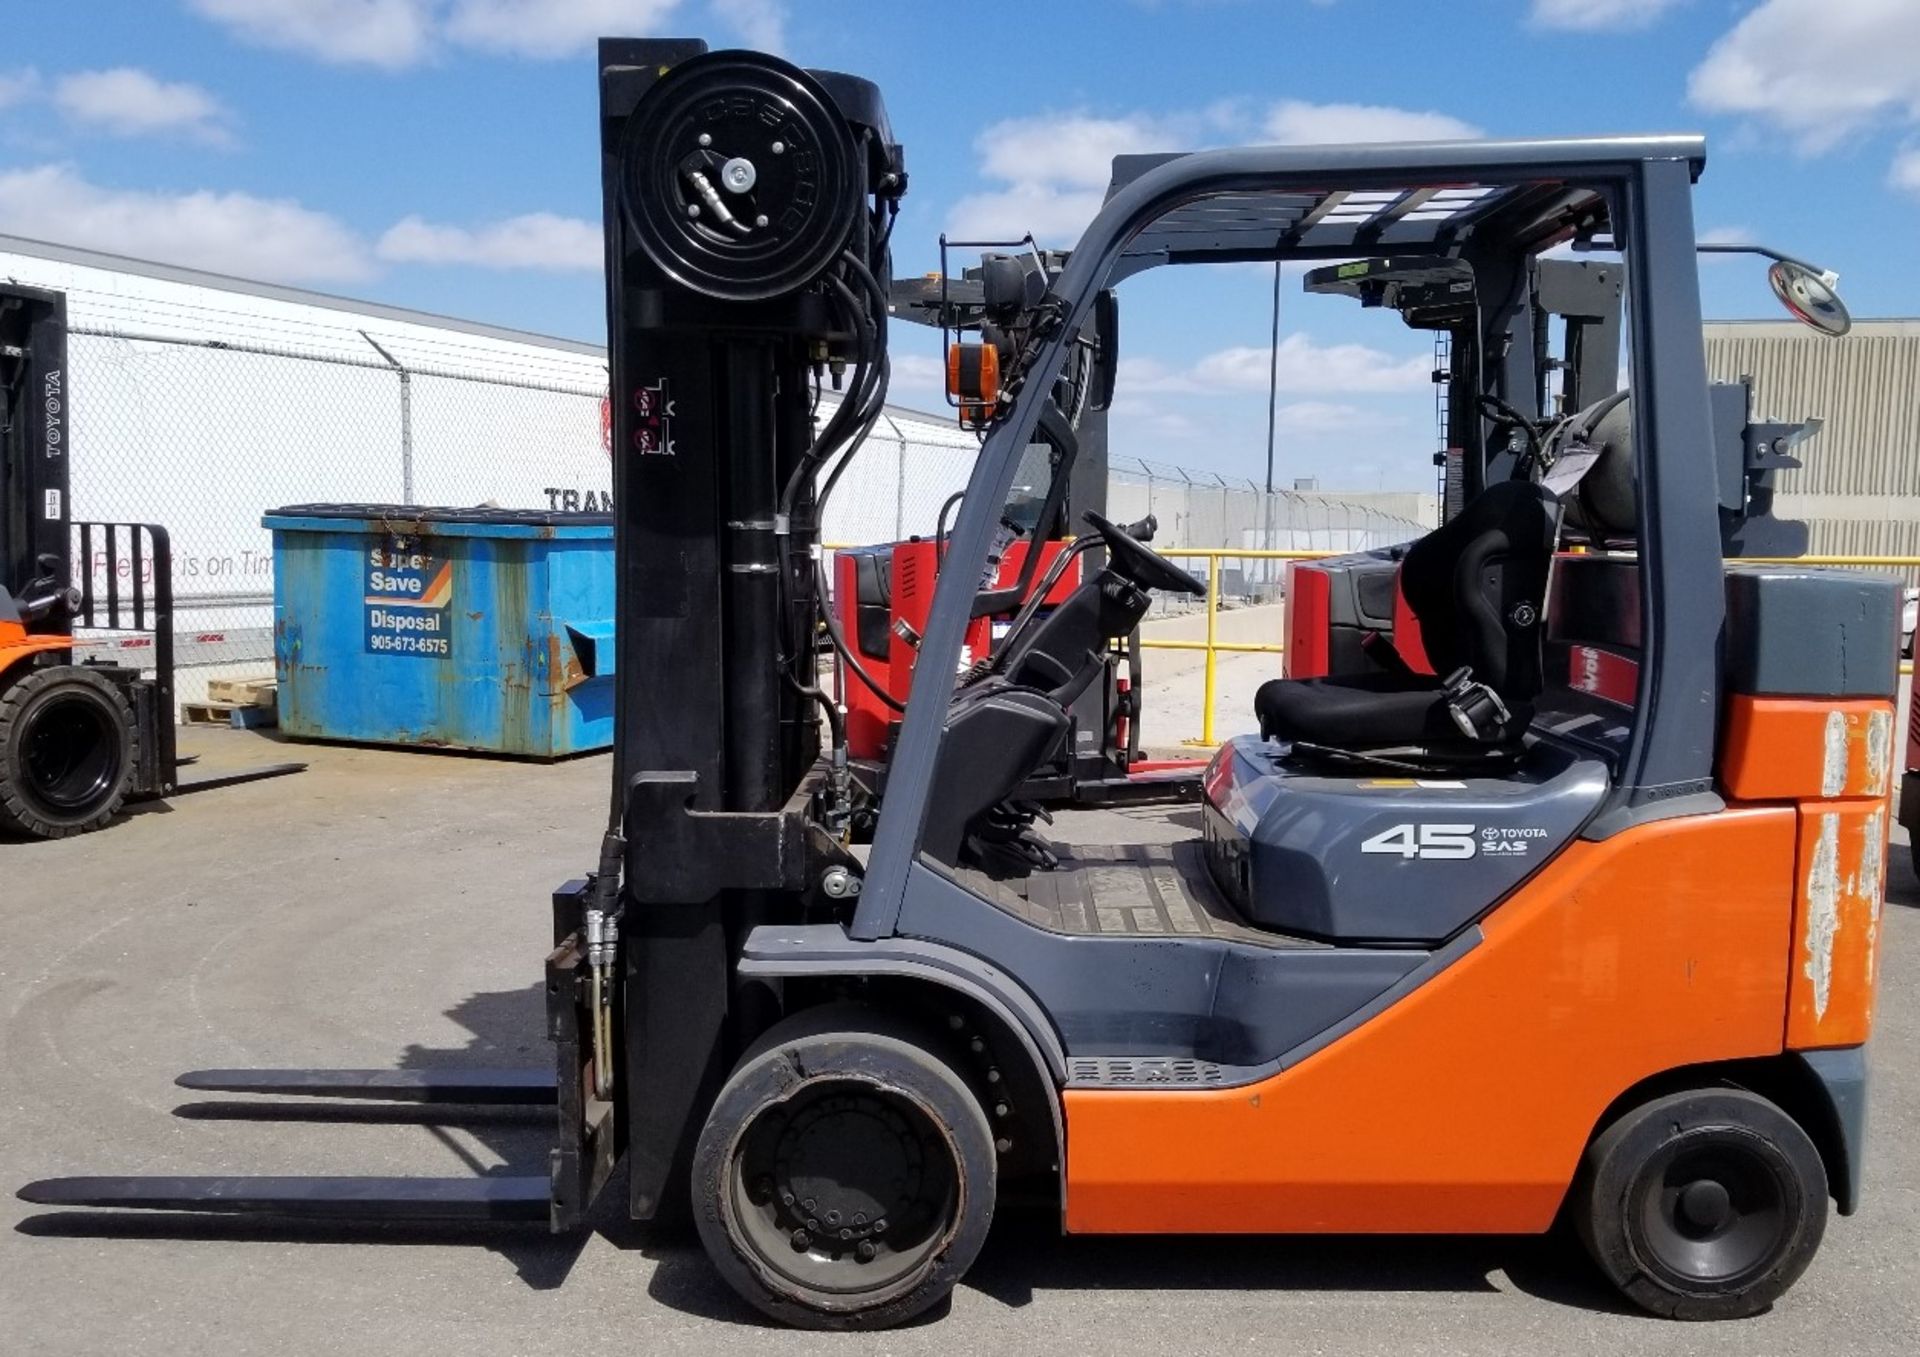 TOYOTA (2015) 8FGC45U LPG FORKLIFT WITH 10,000 LB. CAPACITY, 252" VERTICAL LIFT, SIDE SHIFT, SOLID